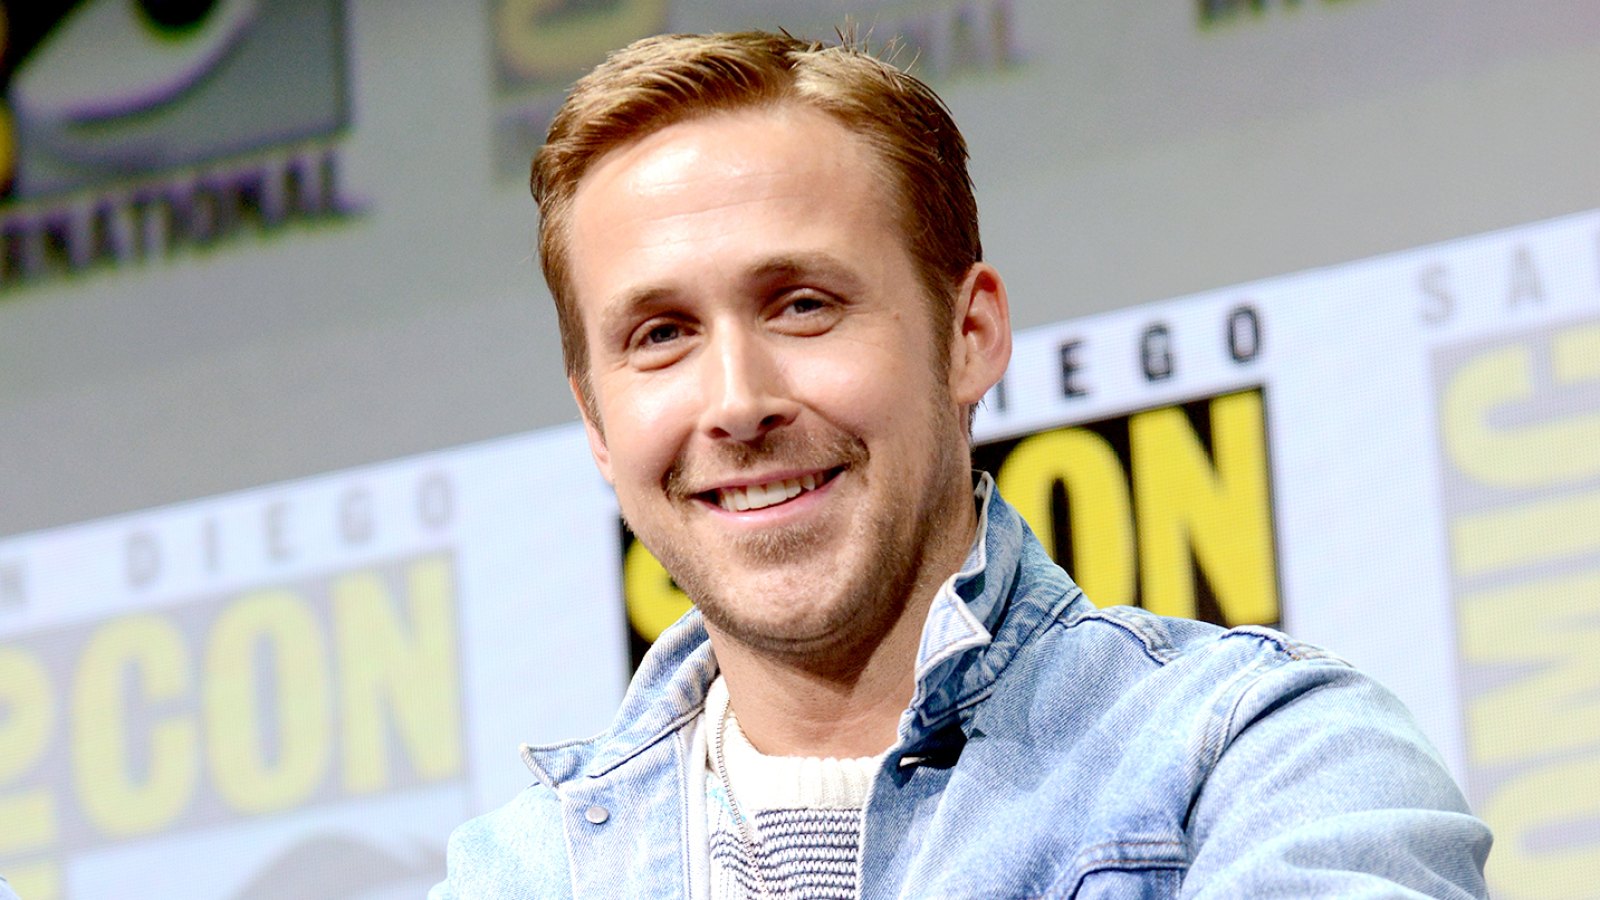 Ryan Gosling attends the Warner Bros. Pictures "Blade Runner 2049" Presentation during Comic-Con International 2017 at San Diego Convention Center on July 22, 2017 in San Diego, California.